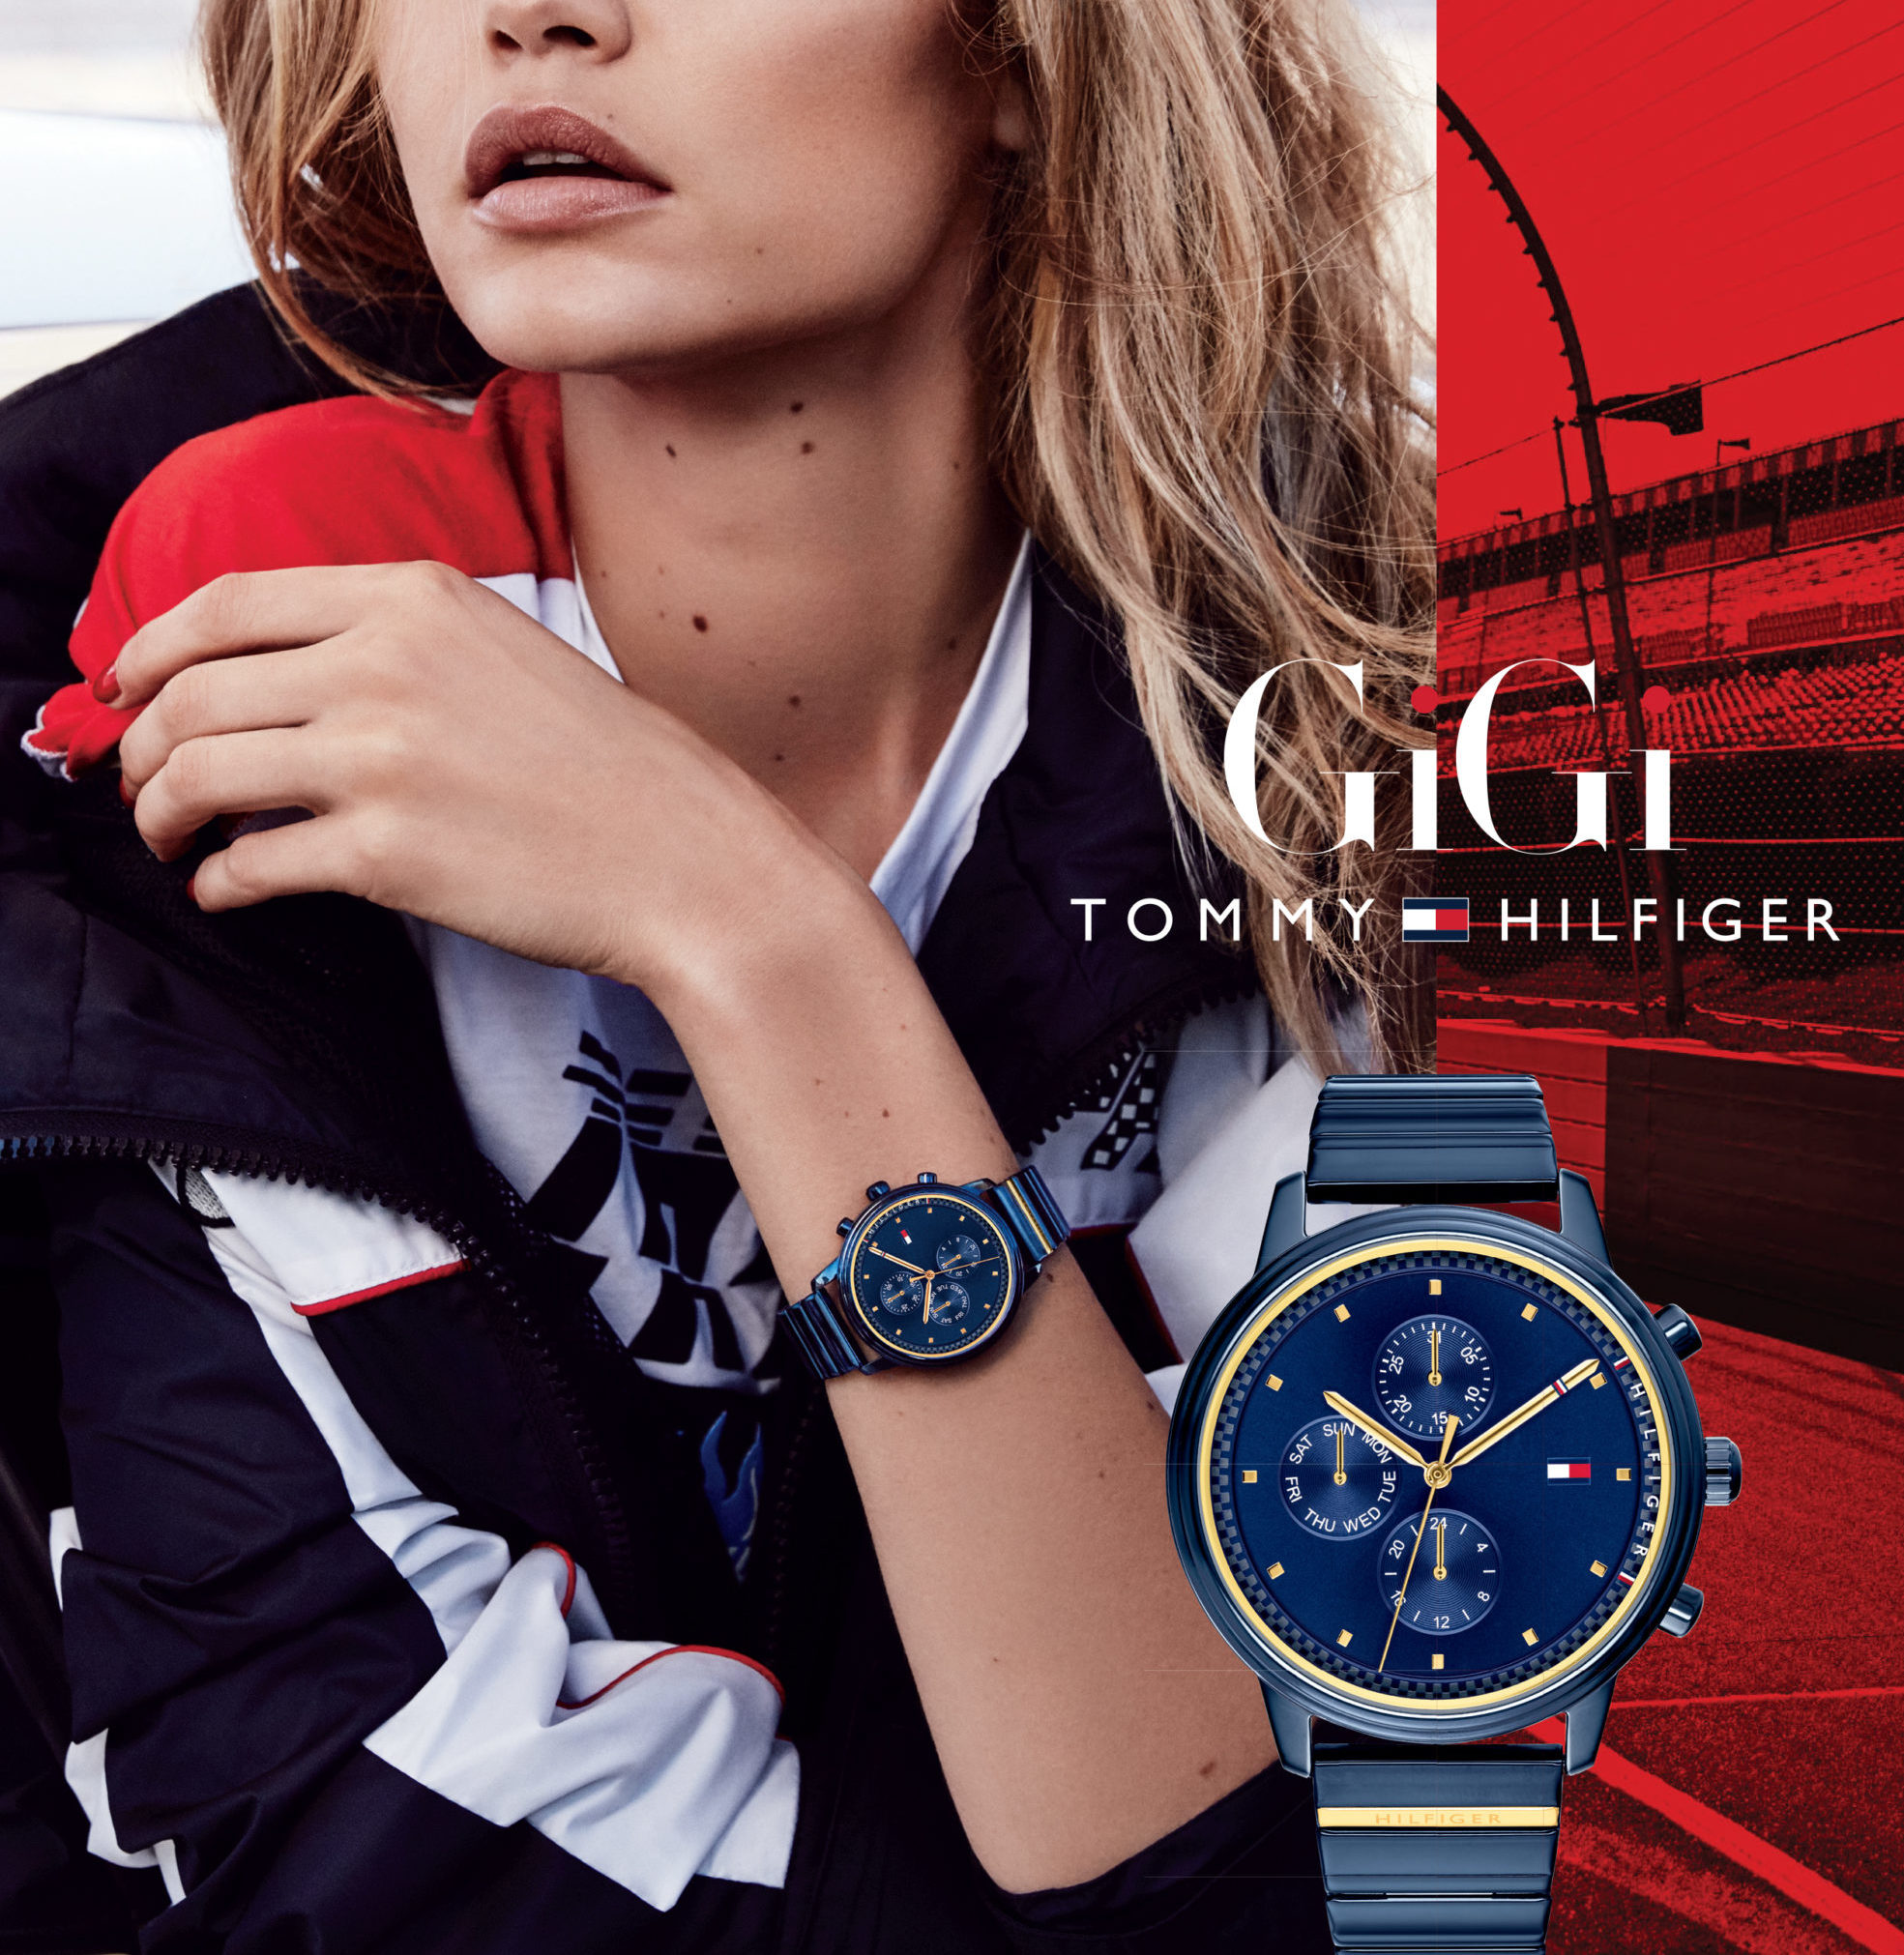 about tommy hilfiger watches